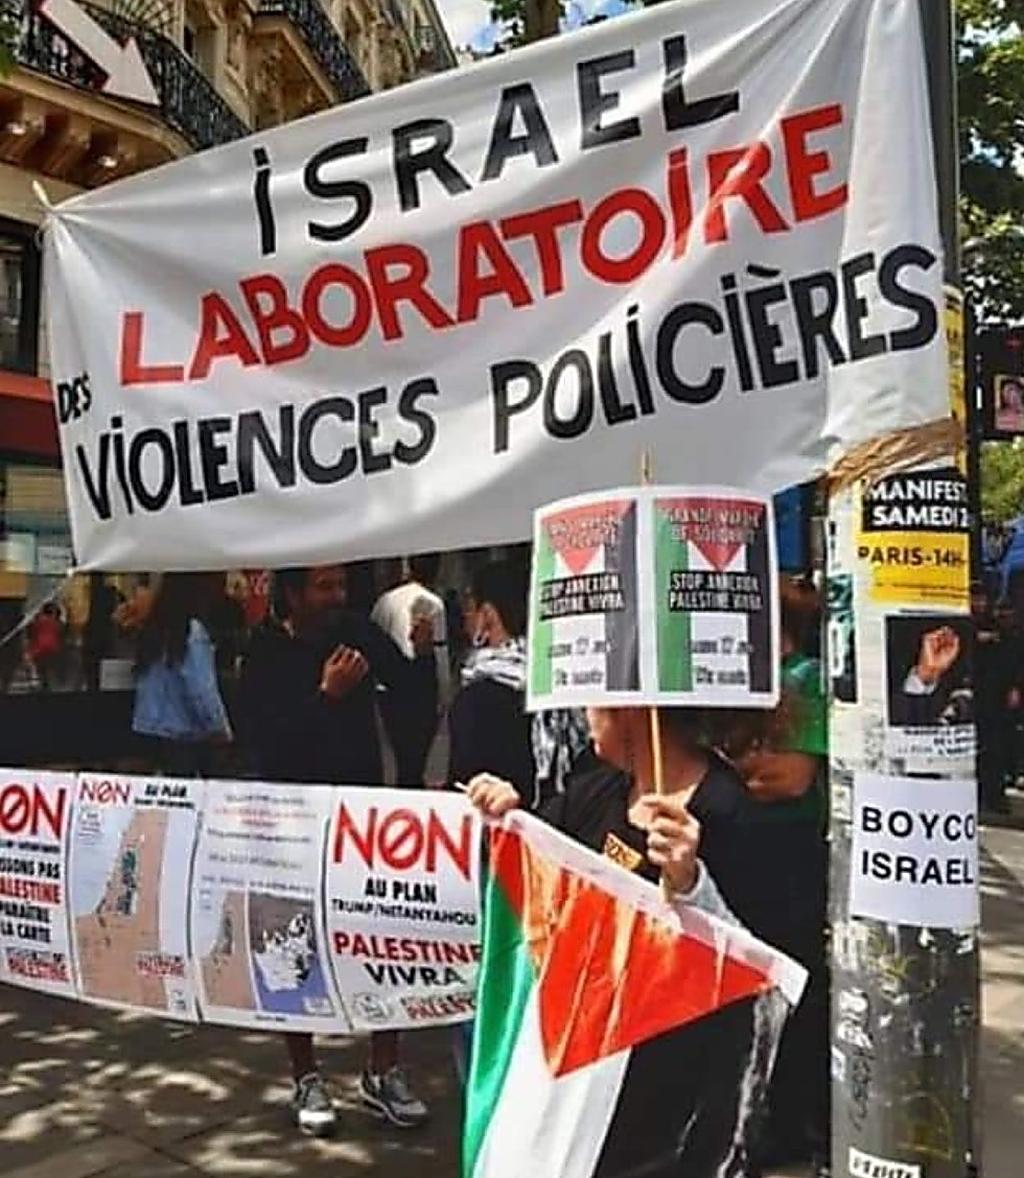 Blood libel against the Jewish state at a protest for George Floyd in France  